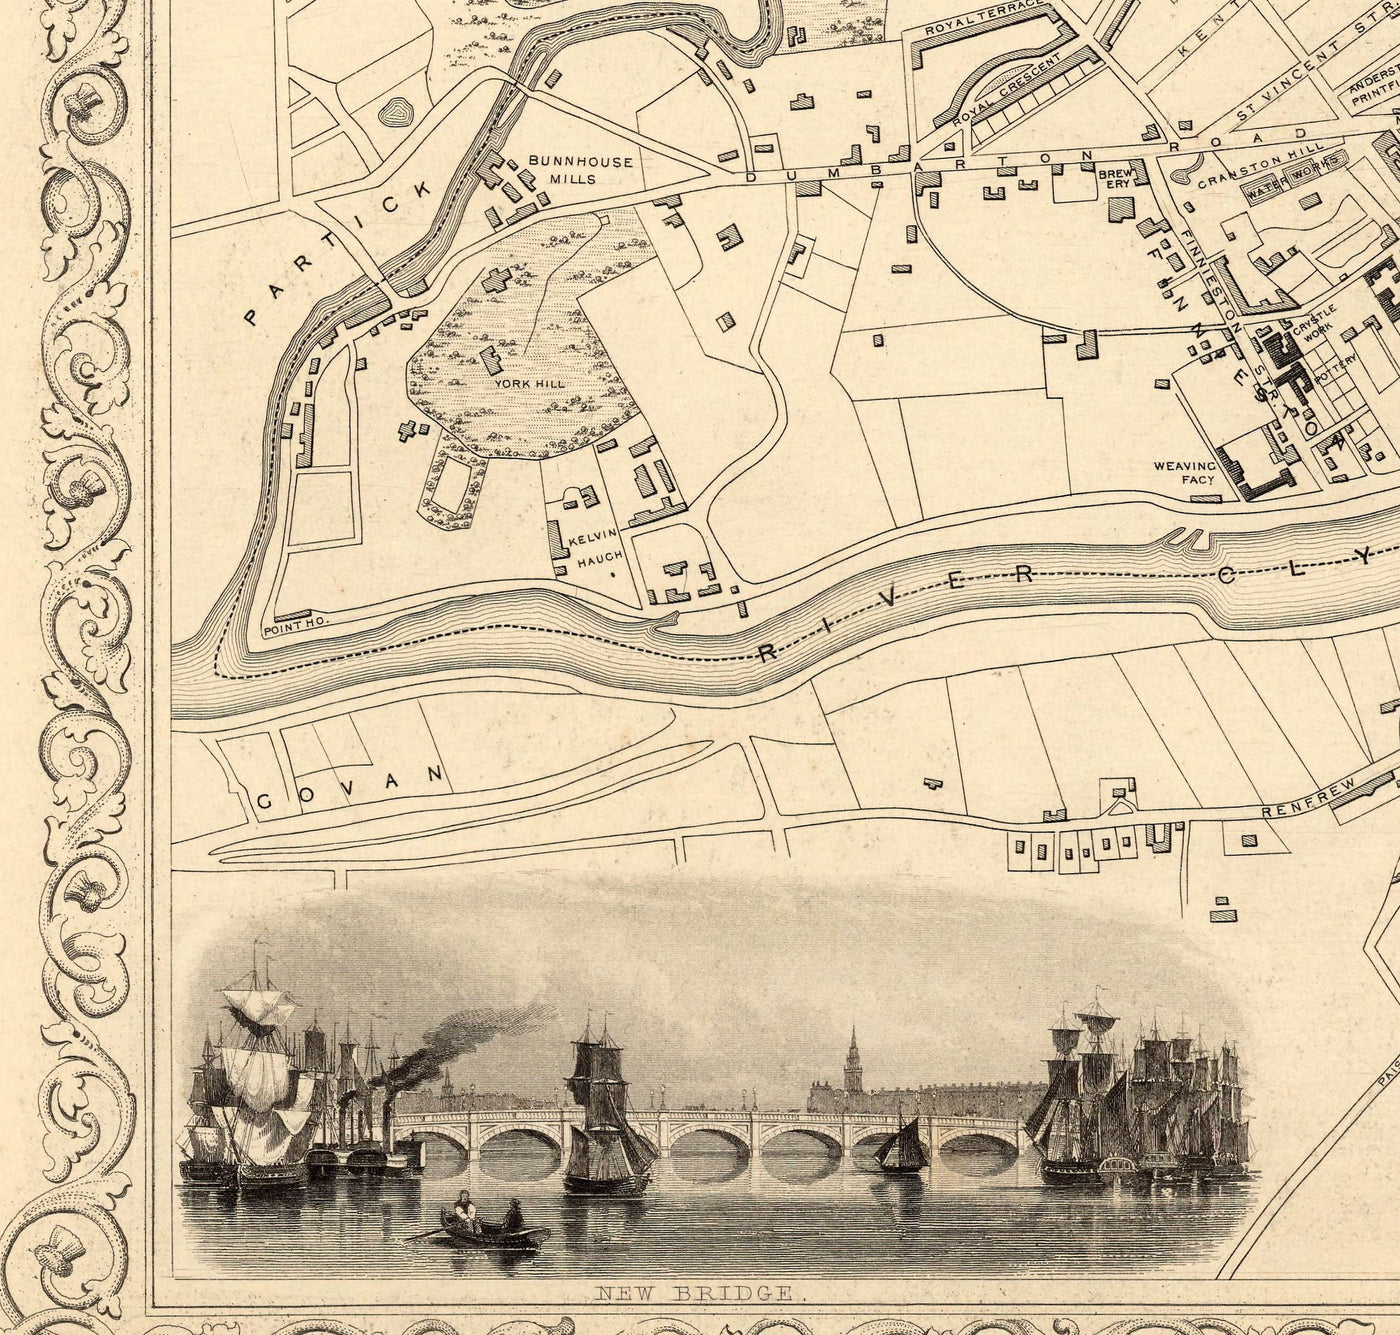 Old Map of Glasgow, 1851 by Tallis & Rapkin - River Clyde, Argyle St, Central, University